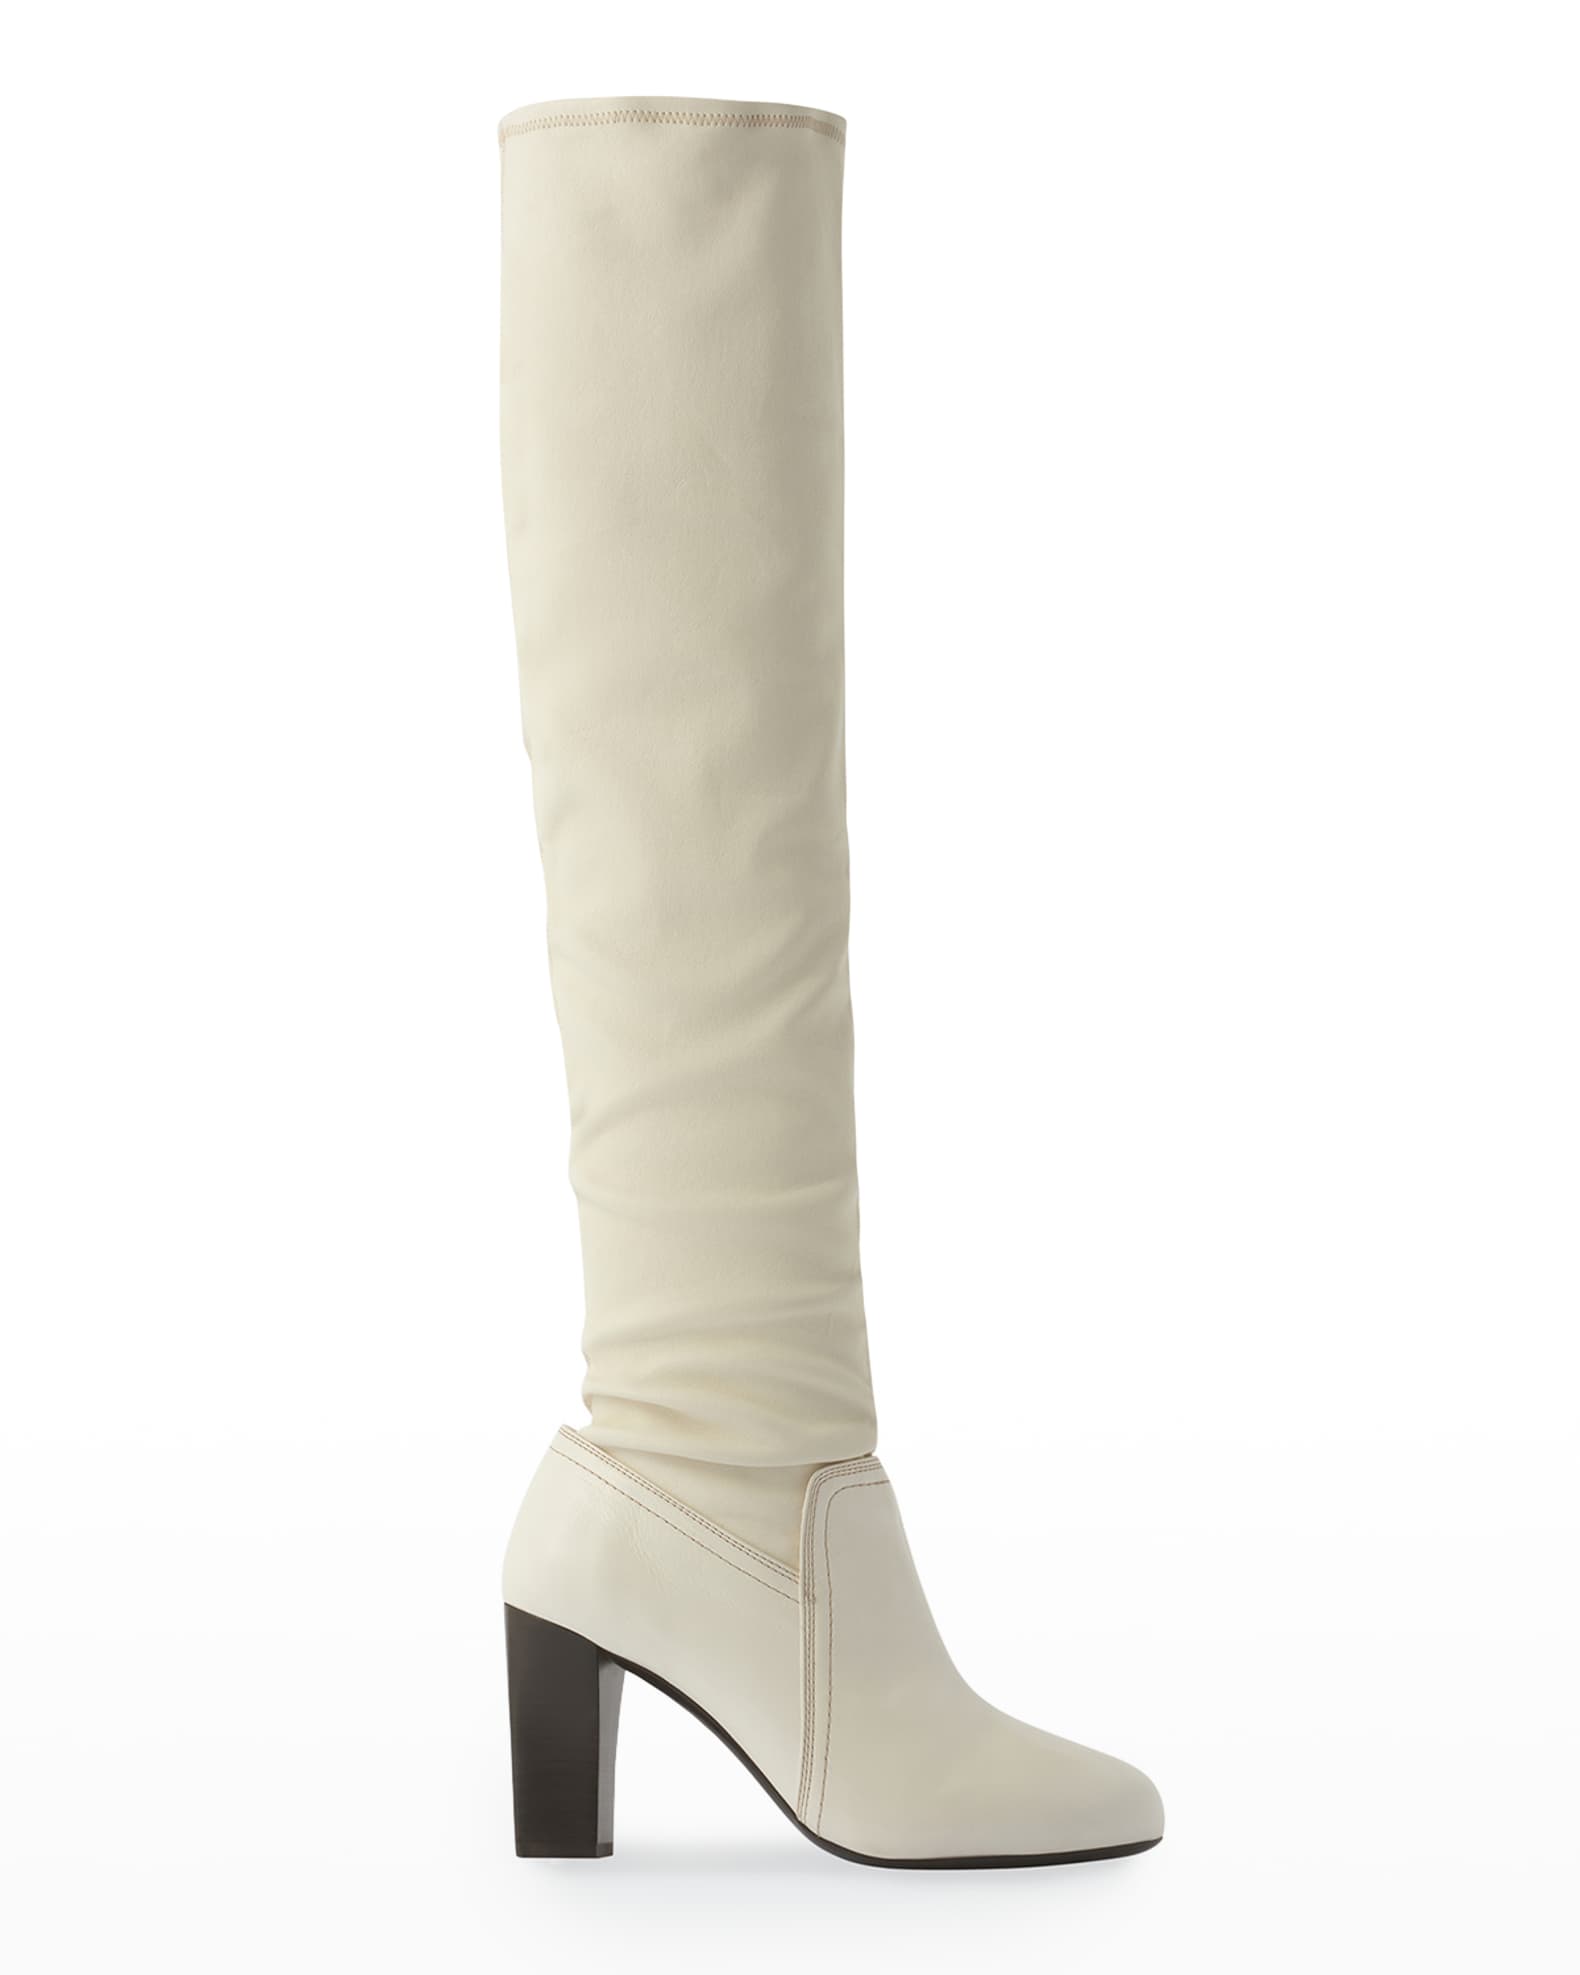 LEMAIRE Stretch Napa Knee Boots | Neiman Marcus